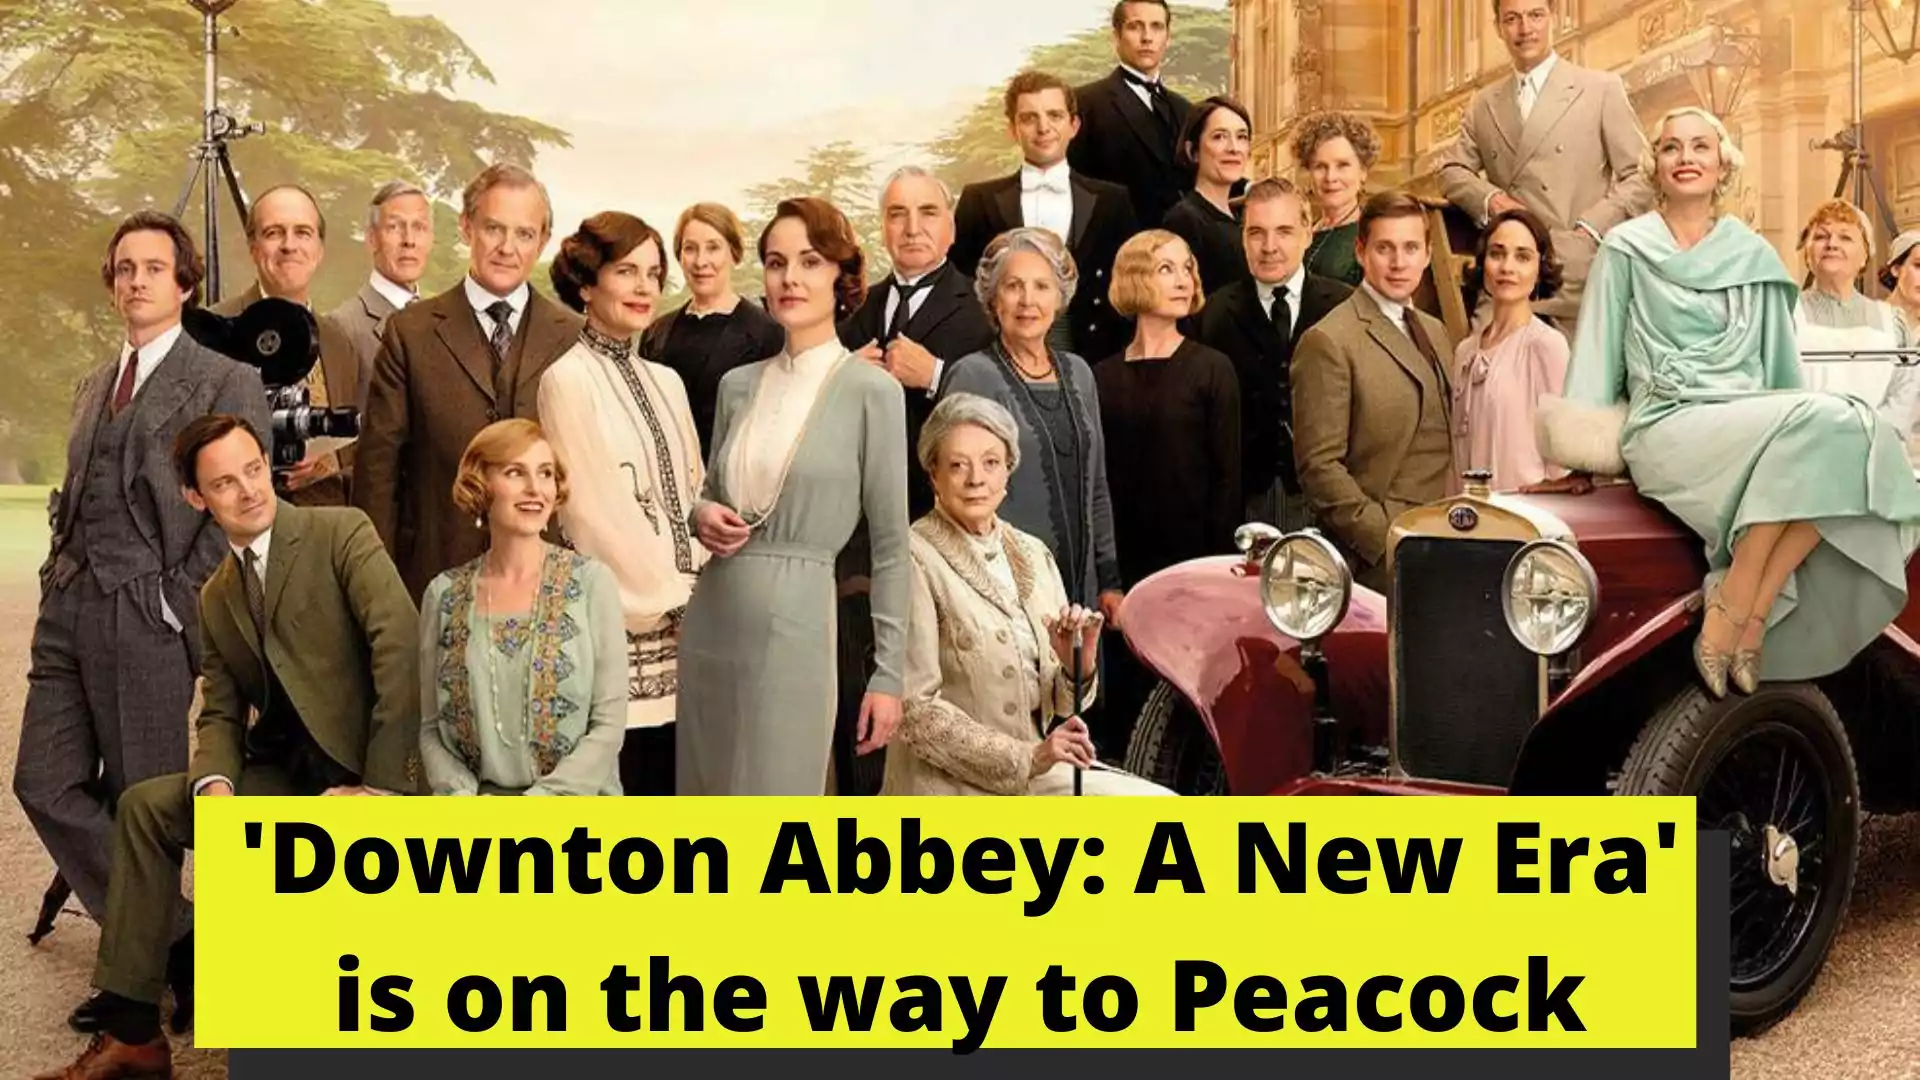 'Downton Abbey: A New Era' is on the way to Peacock